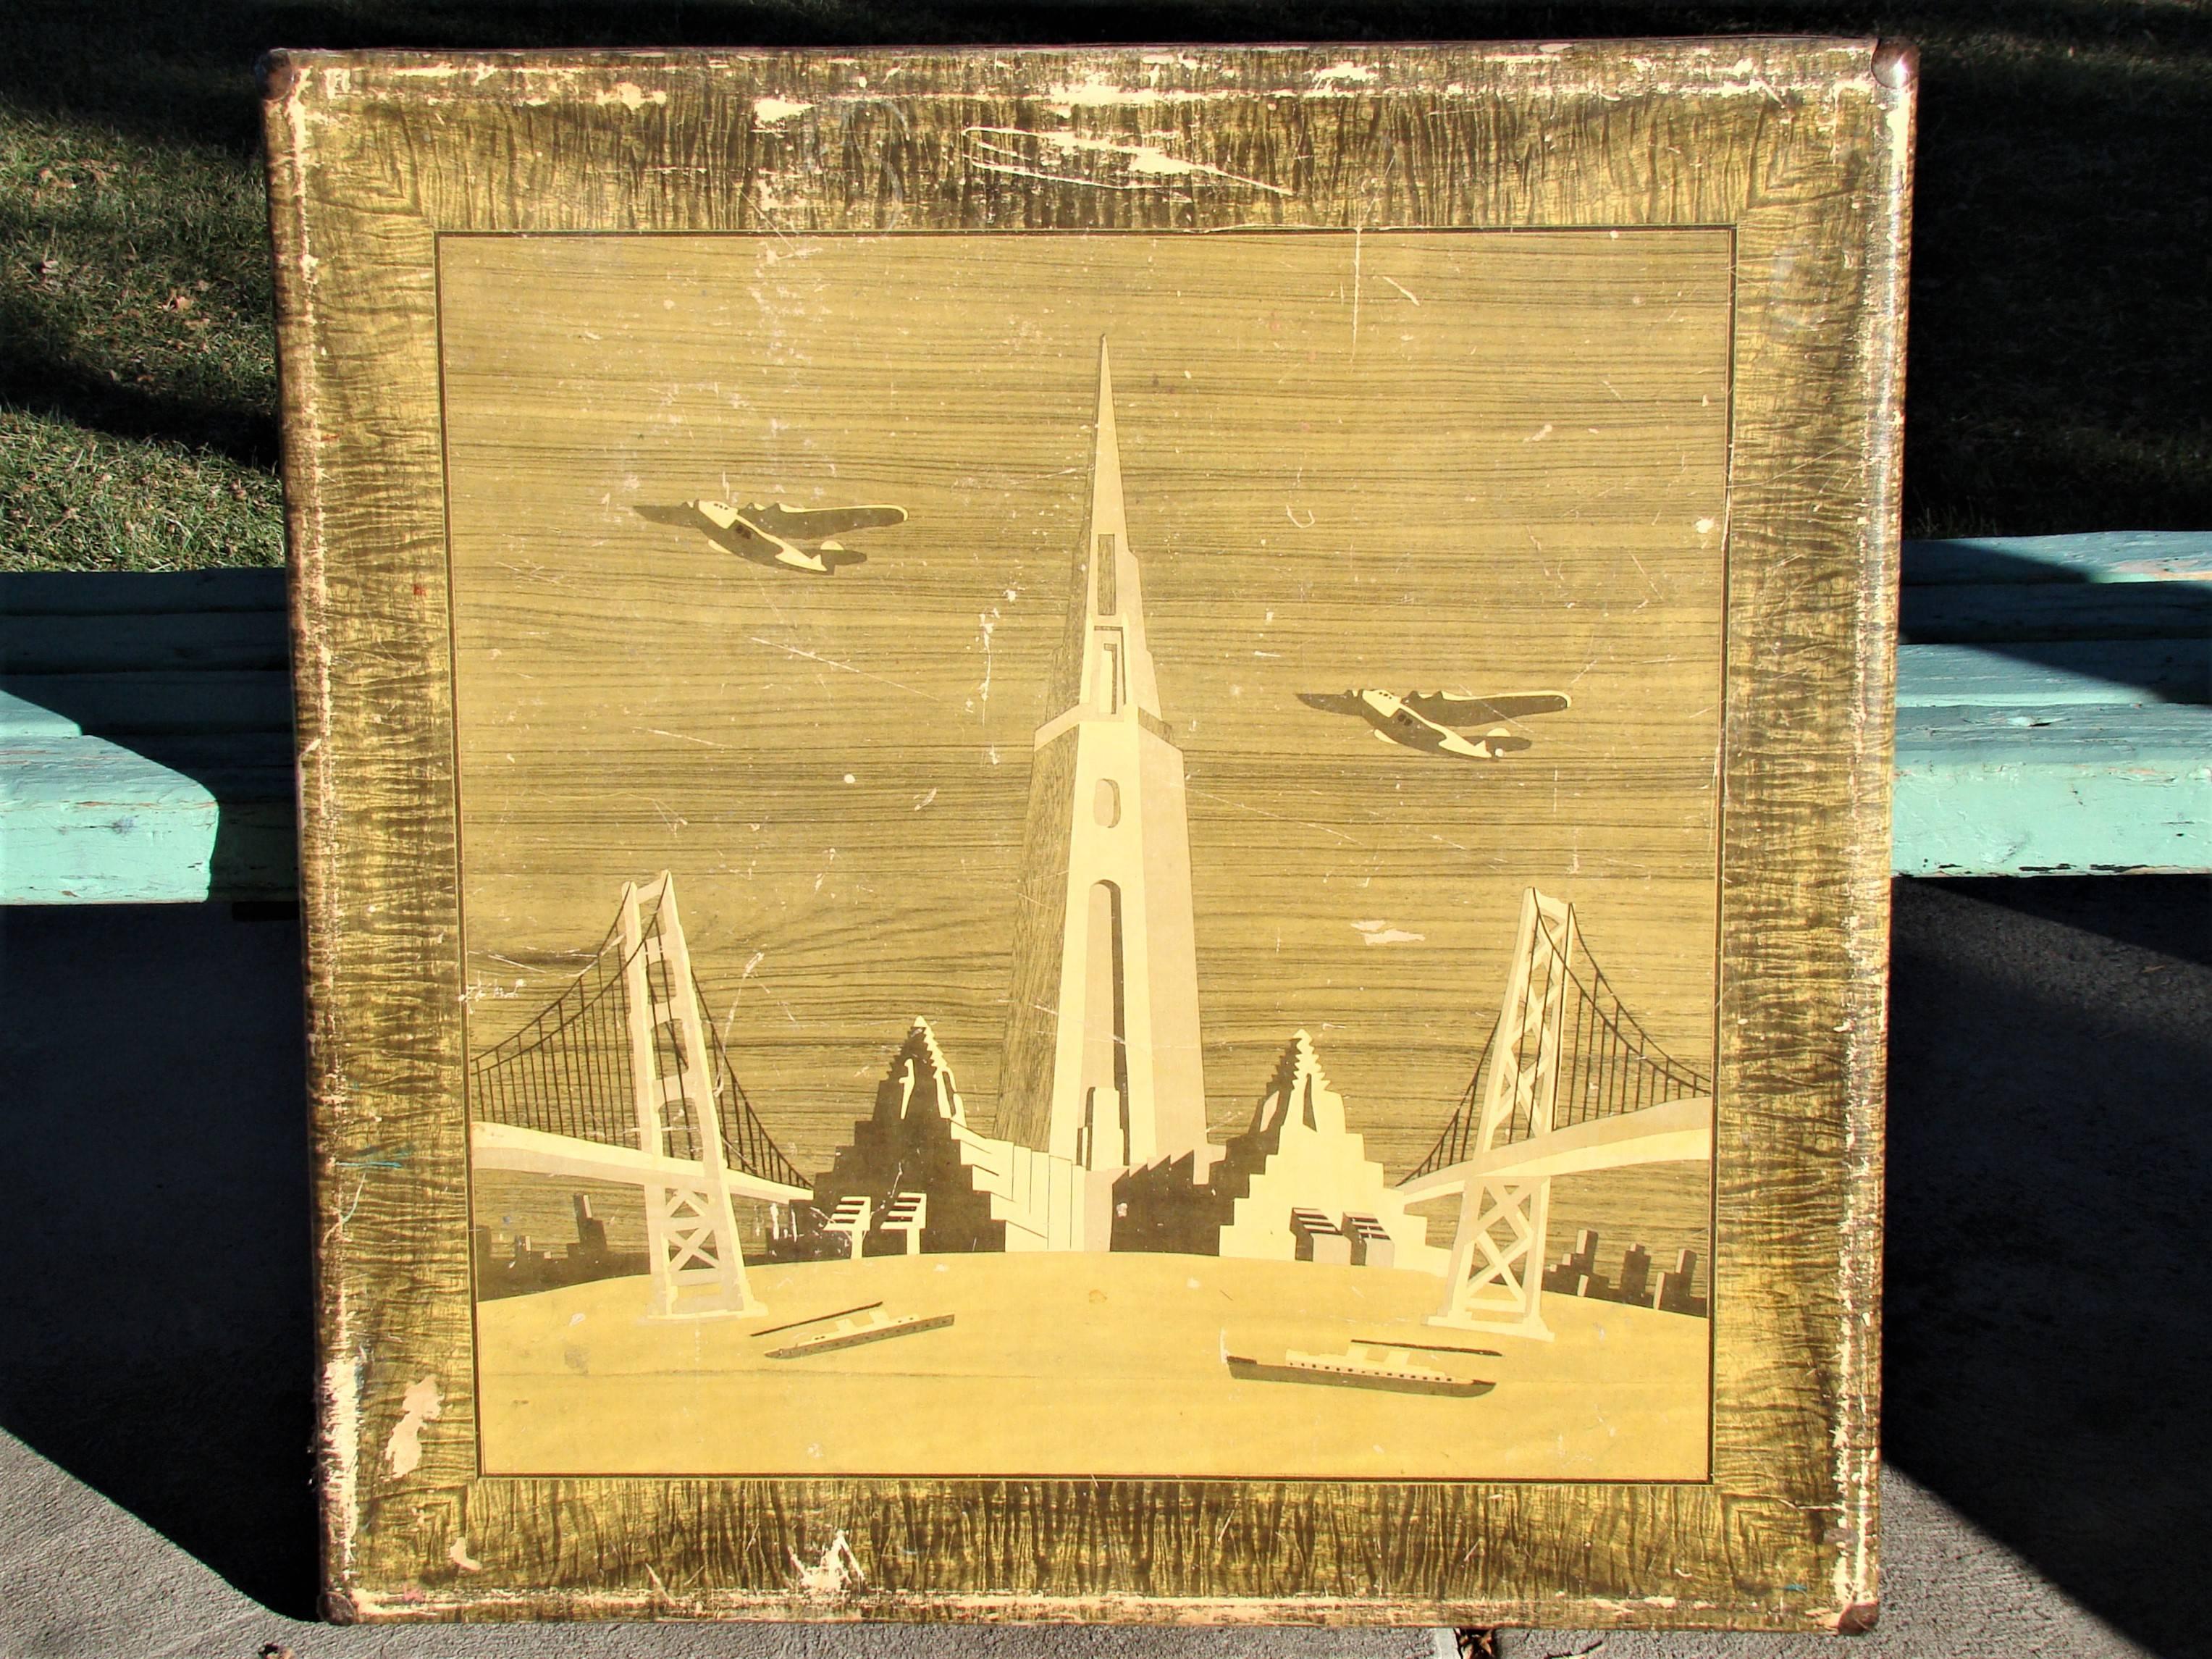 Art Deco card table featuring futuristic buildings, bridges, and planes from the 1939 San Francisco worlds fair. This was the Golden Gate International exposition celebrating among other things the city’s two newly built bridges. The Oakland Bay